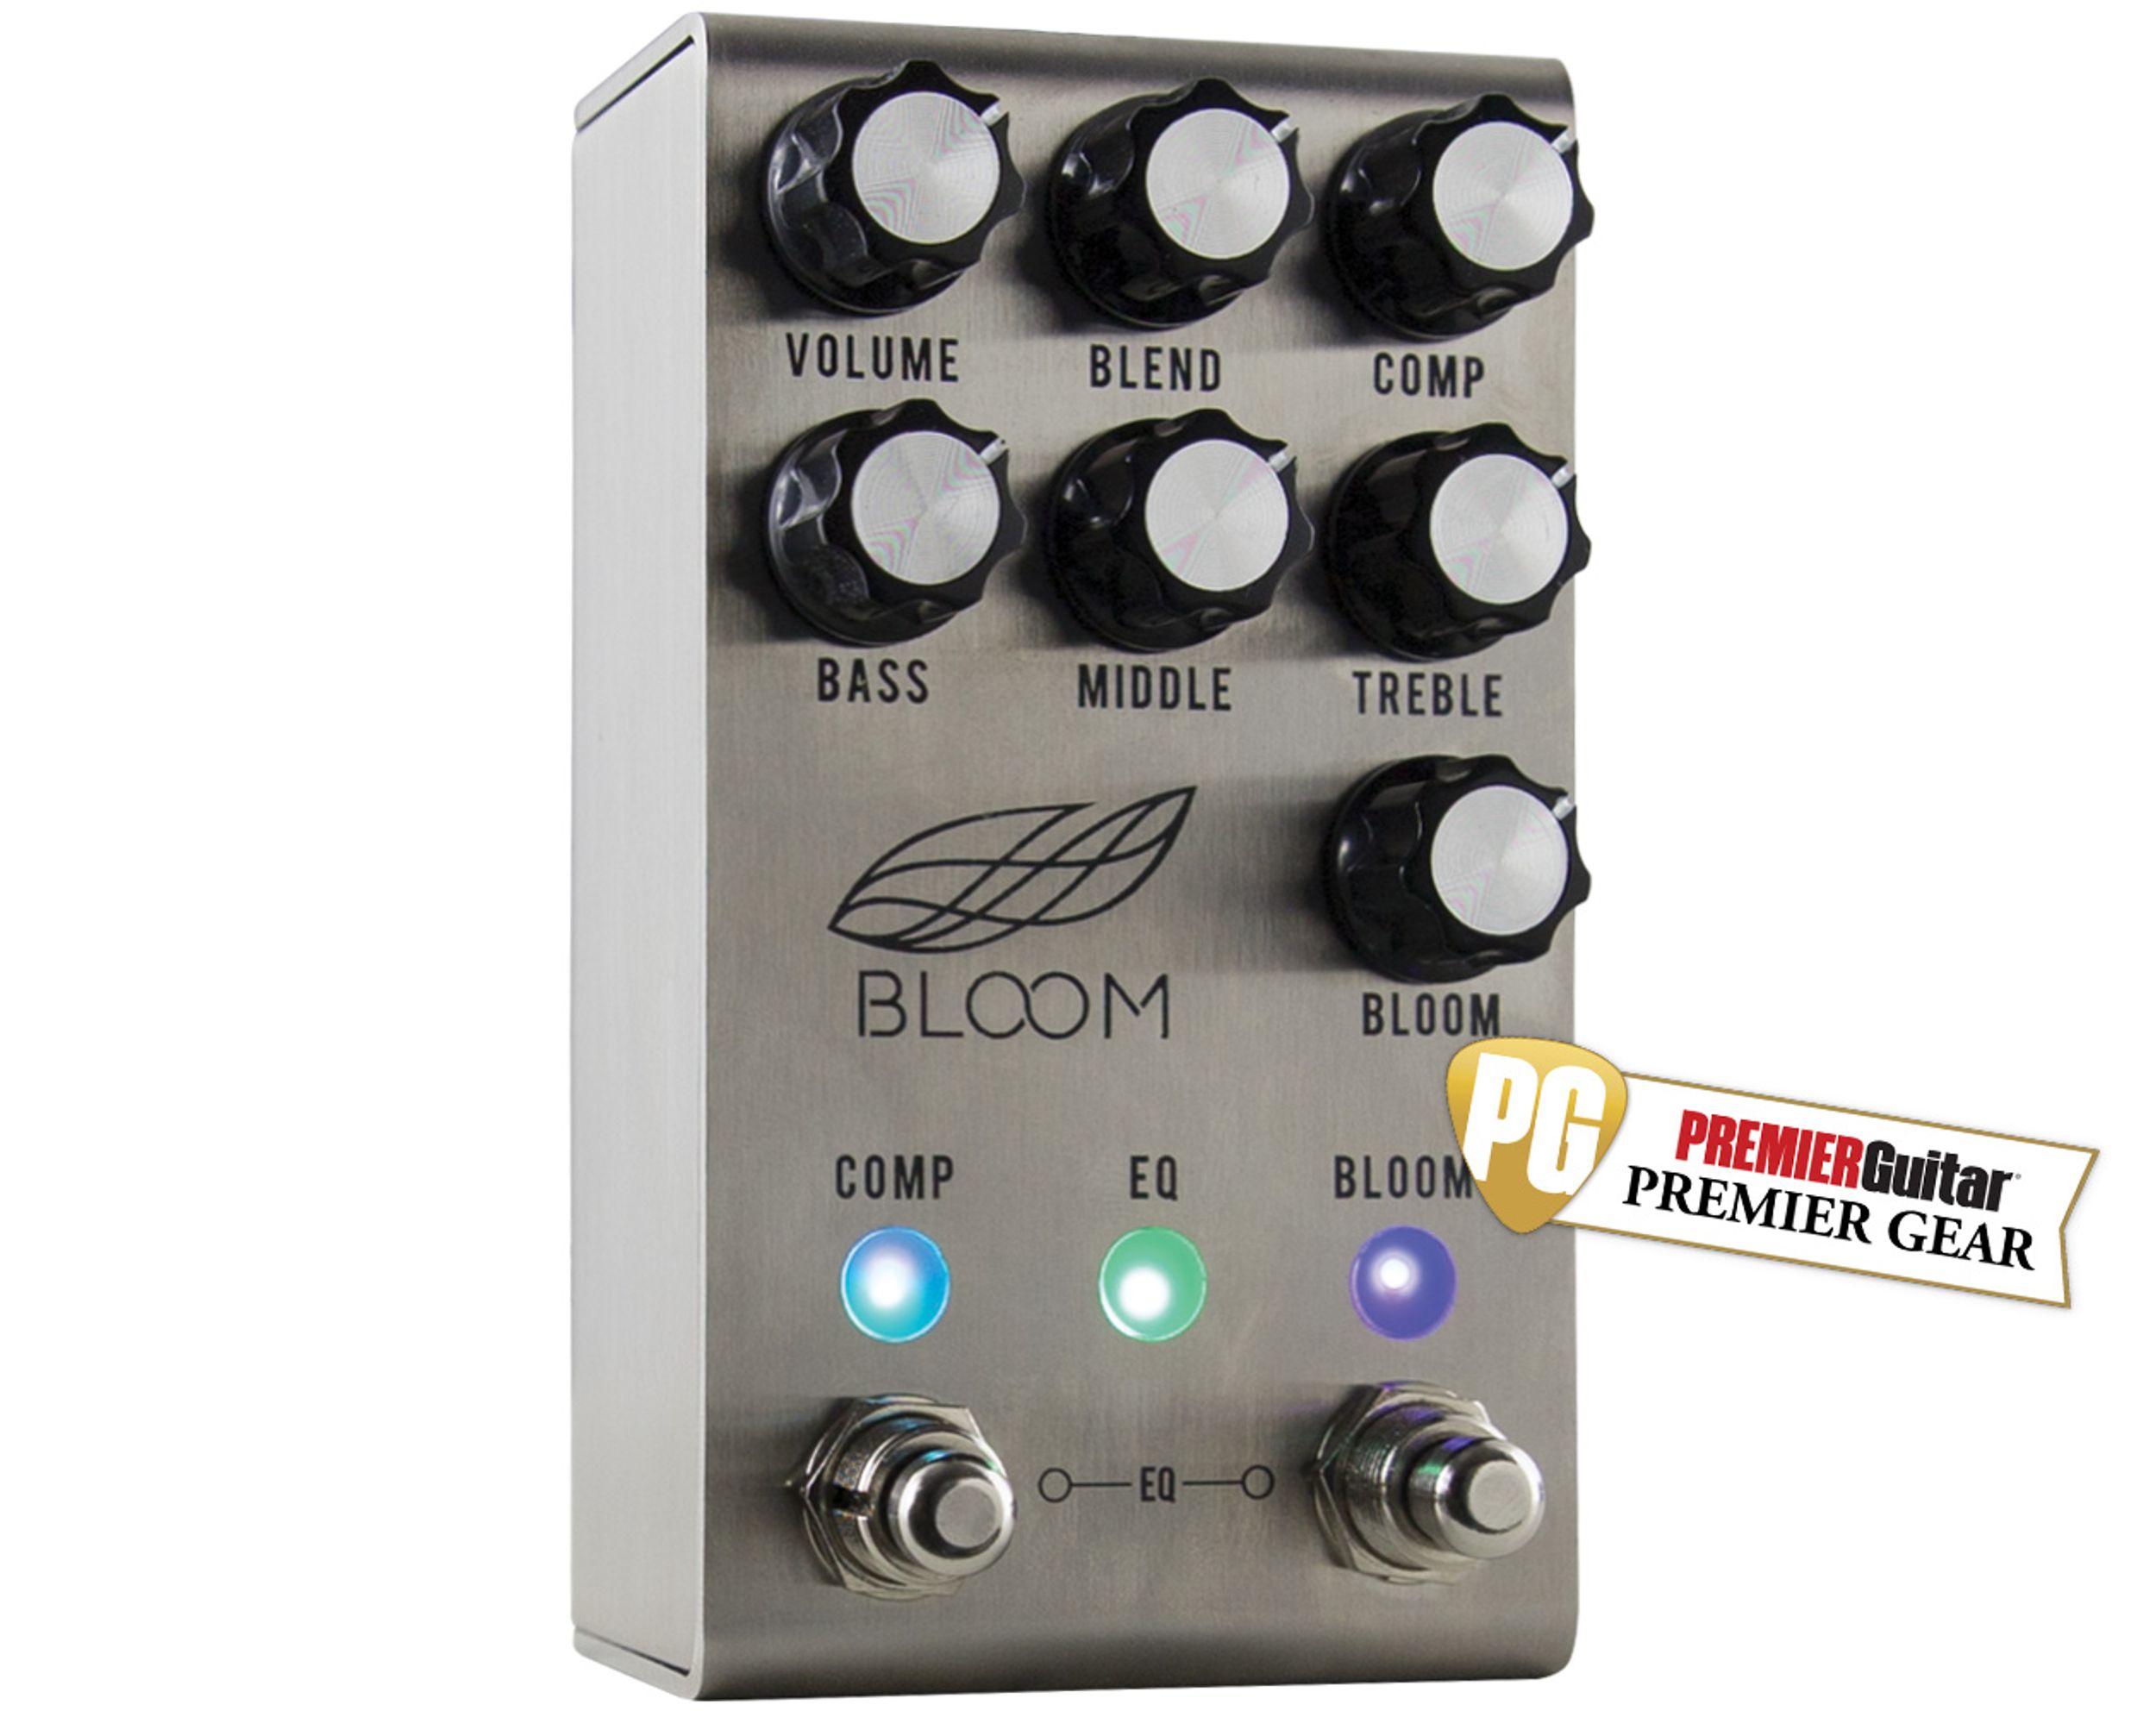 Is This the Most Versatile Compressor Ever?